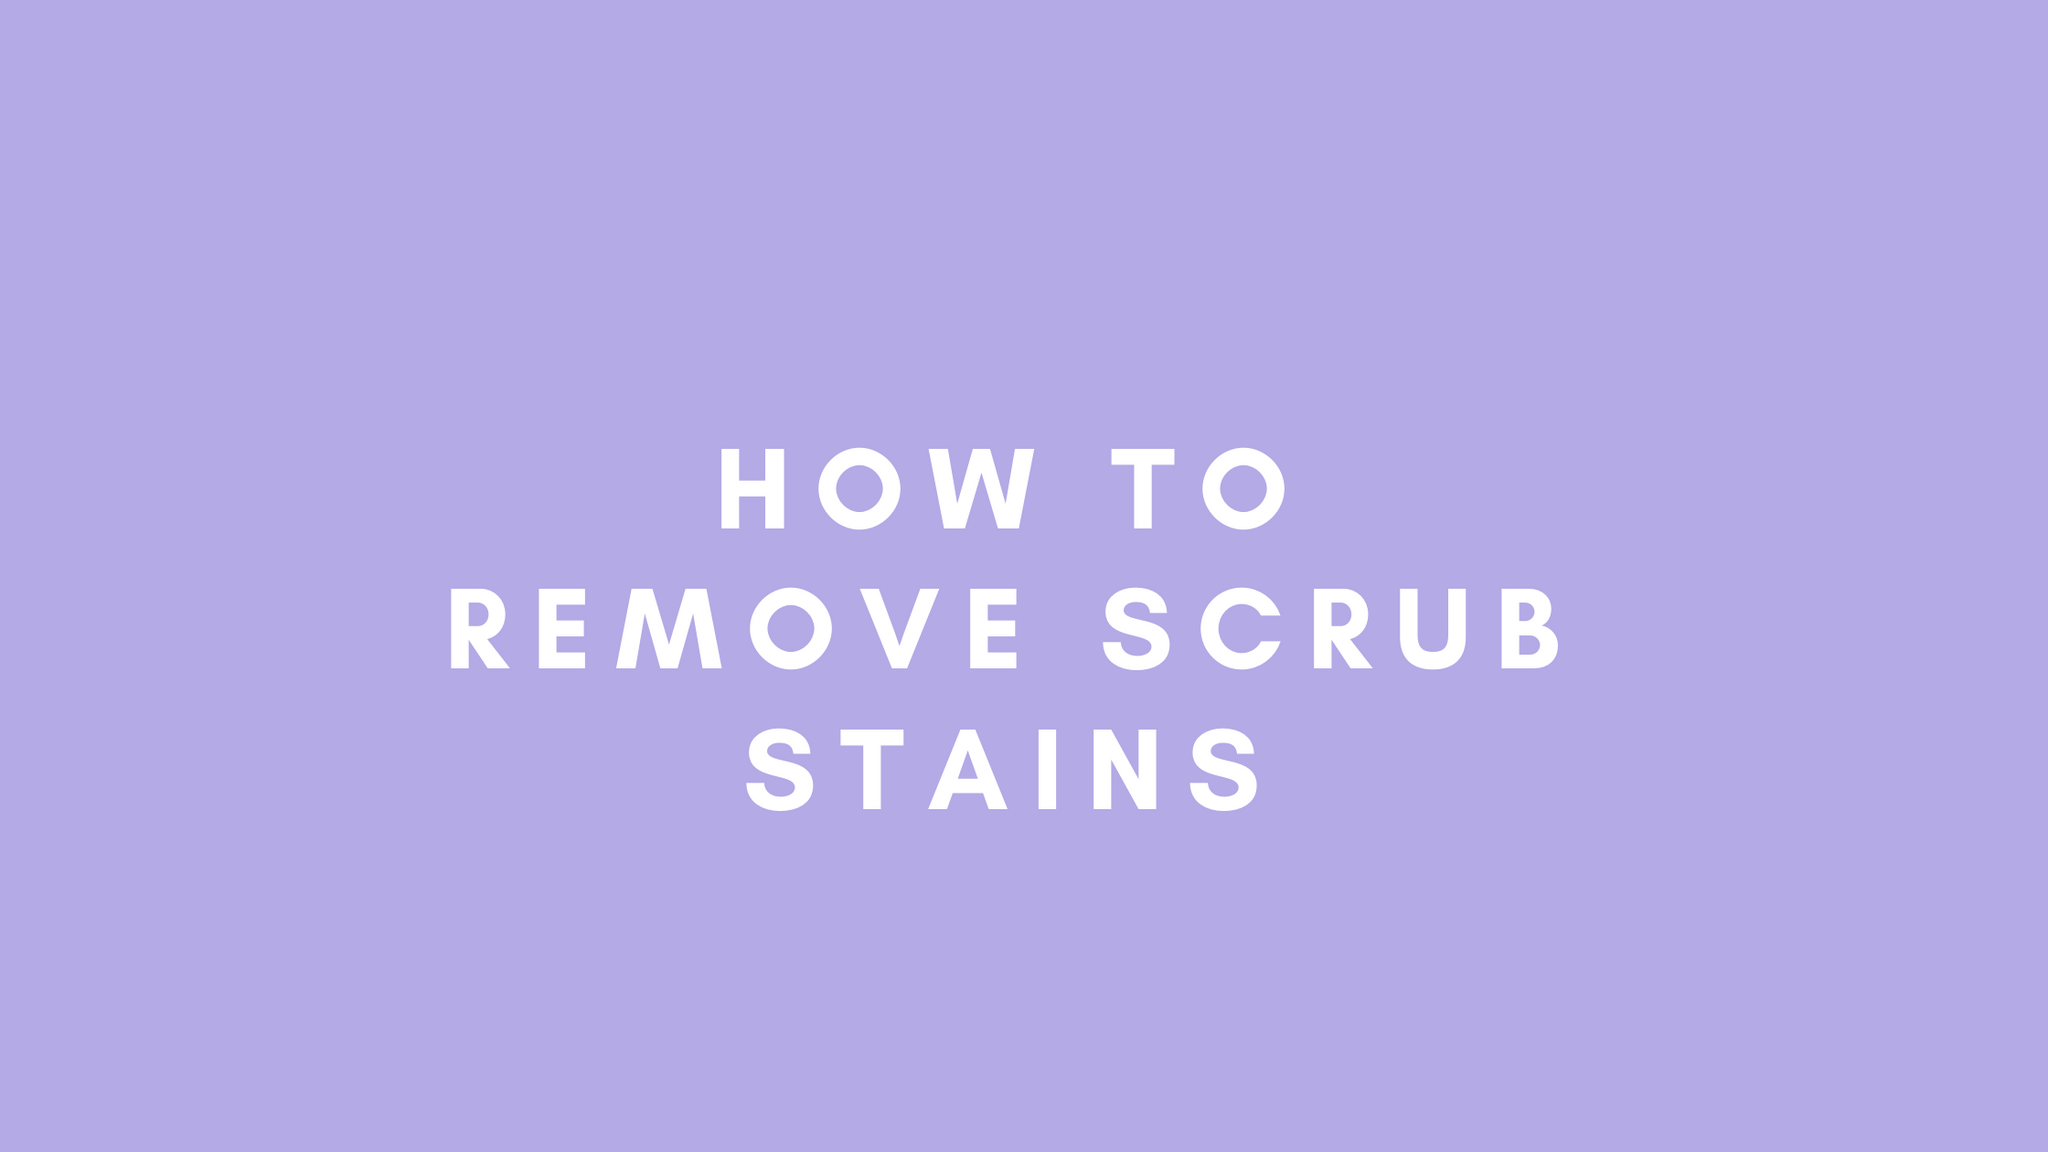 How To Remove Scrub Stains